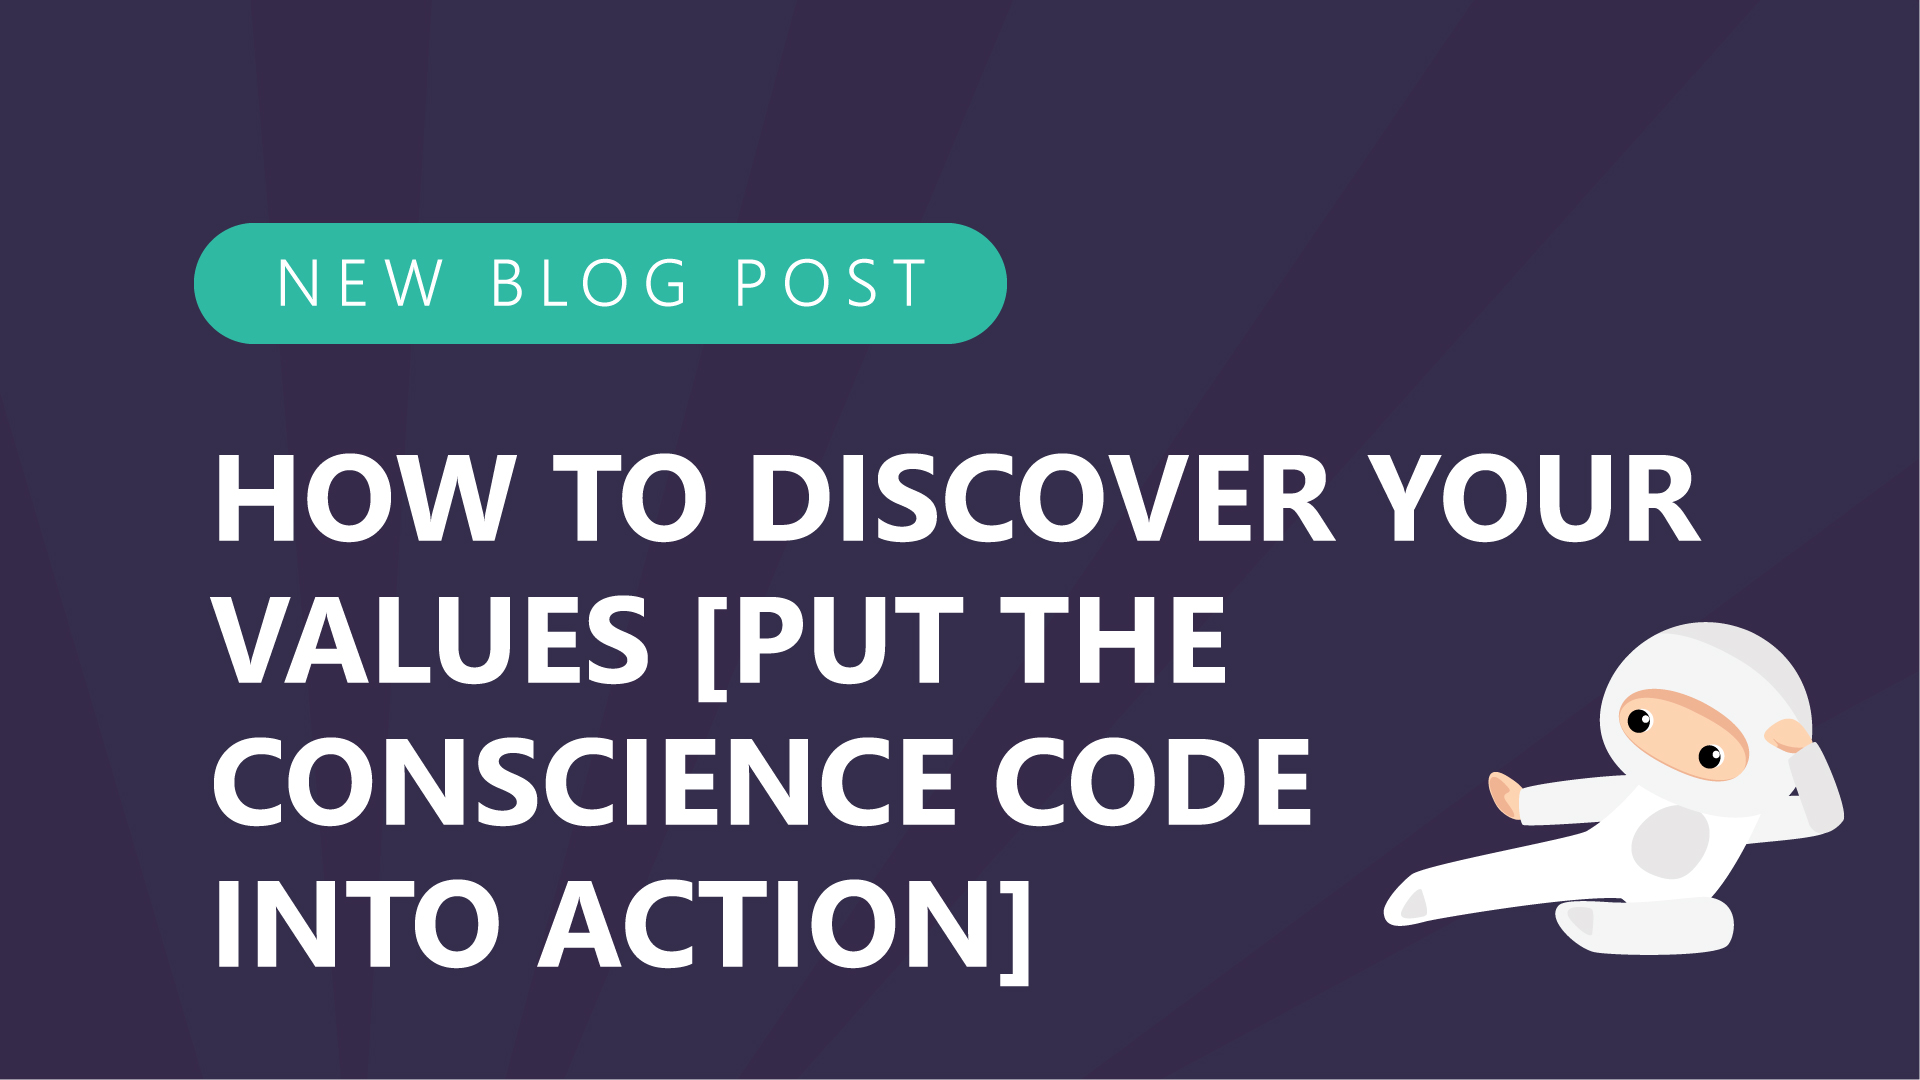 19-How-to-Discover-Your-Values-Put-The-Conscience-Code-into-Action.jpg